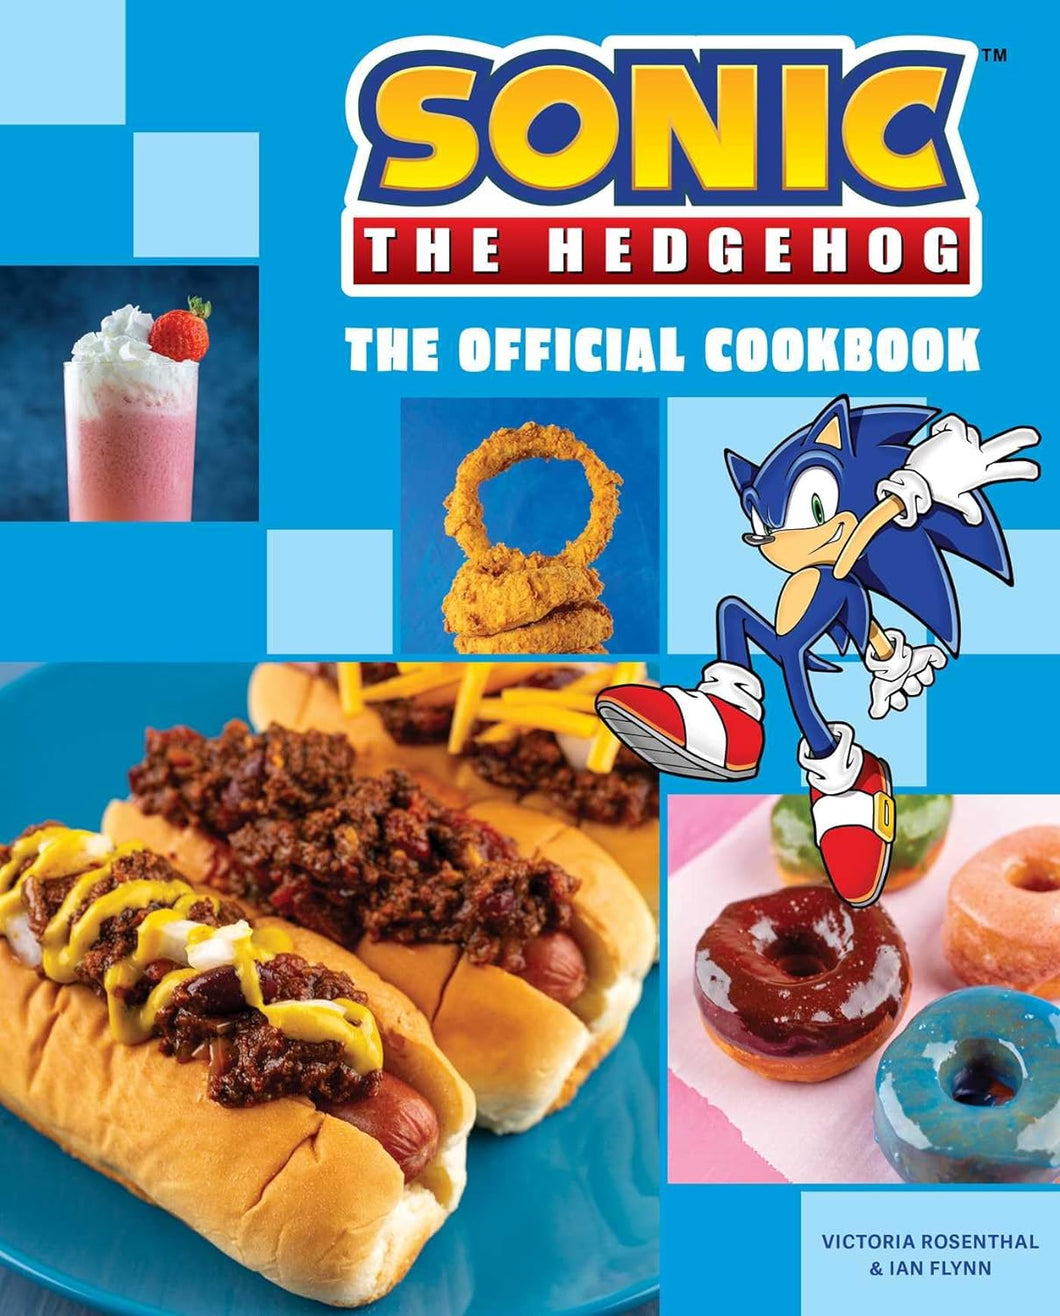 Sonic the Hedgehog: The Official Cookbook (Hardcover)